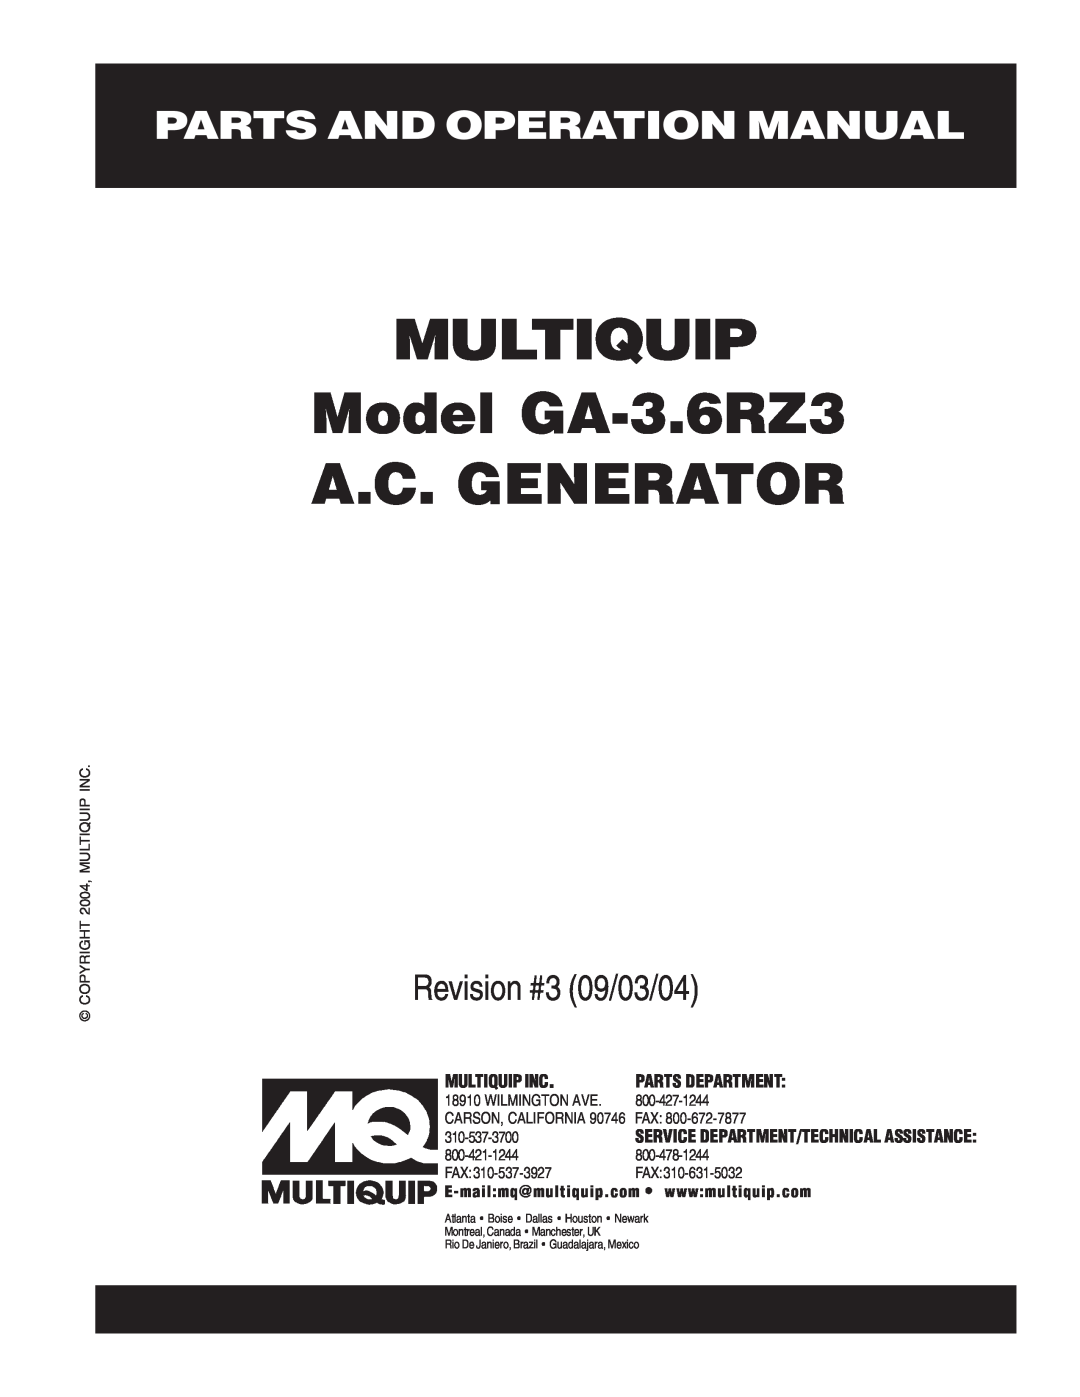 Multiquip operation manual MULTIQUIP Model GA-3.6RZ3 A.C. GENERATOR, Parts And Operation Manual, Revision #3 09/03/04 